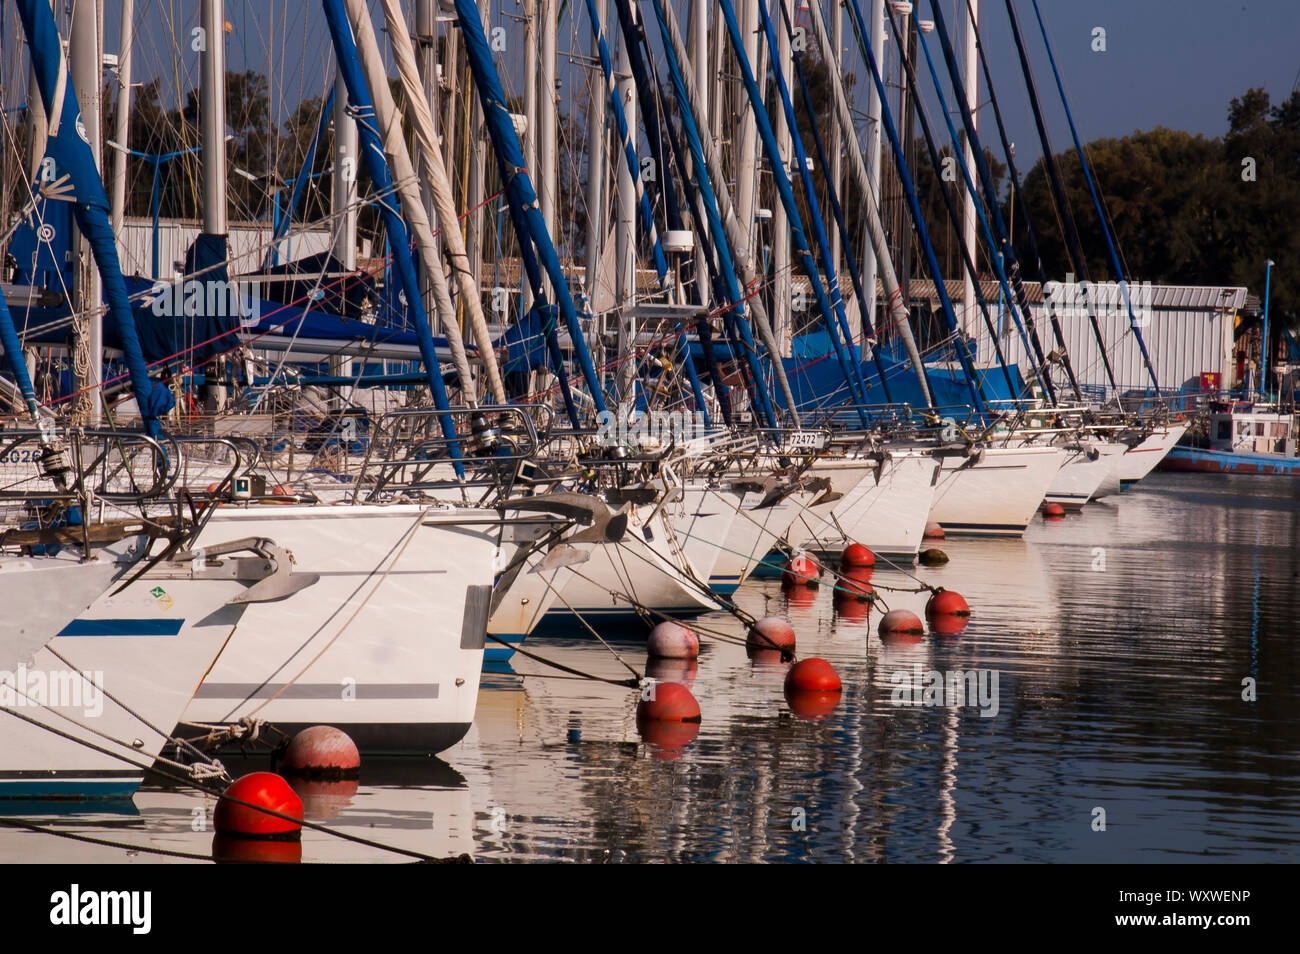 Sail boats in the marine Stock Photo